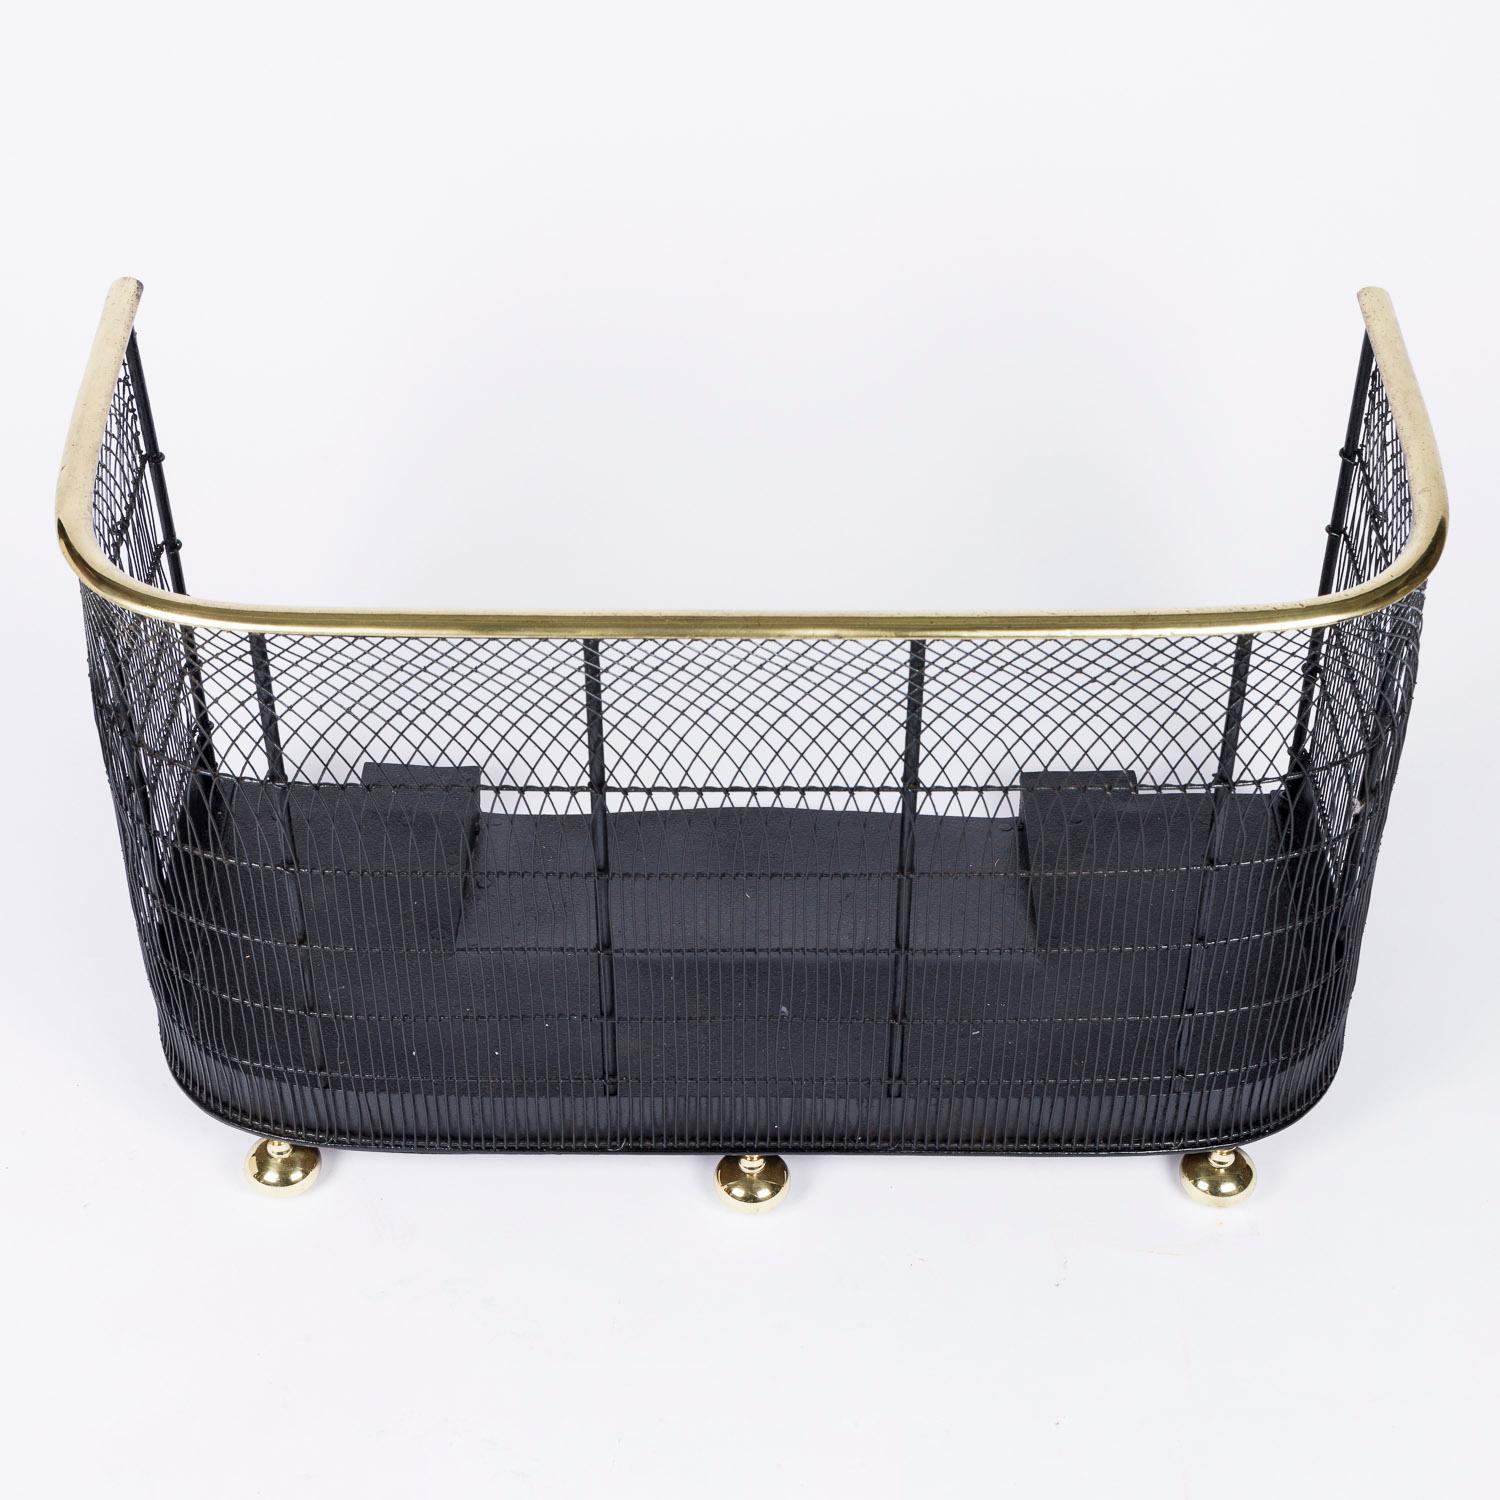 An Edwardian nursery fender, fireplace spark guard.

With brass rail and bun feet.

Curved woven black mesh in arch form.

